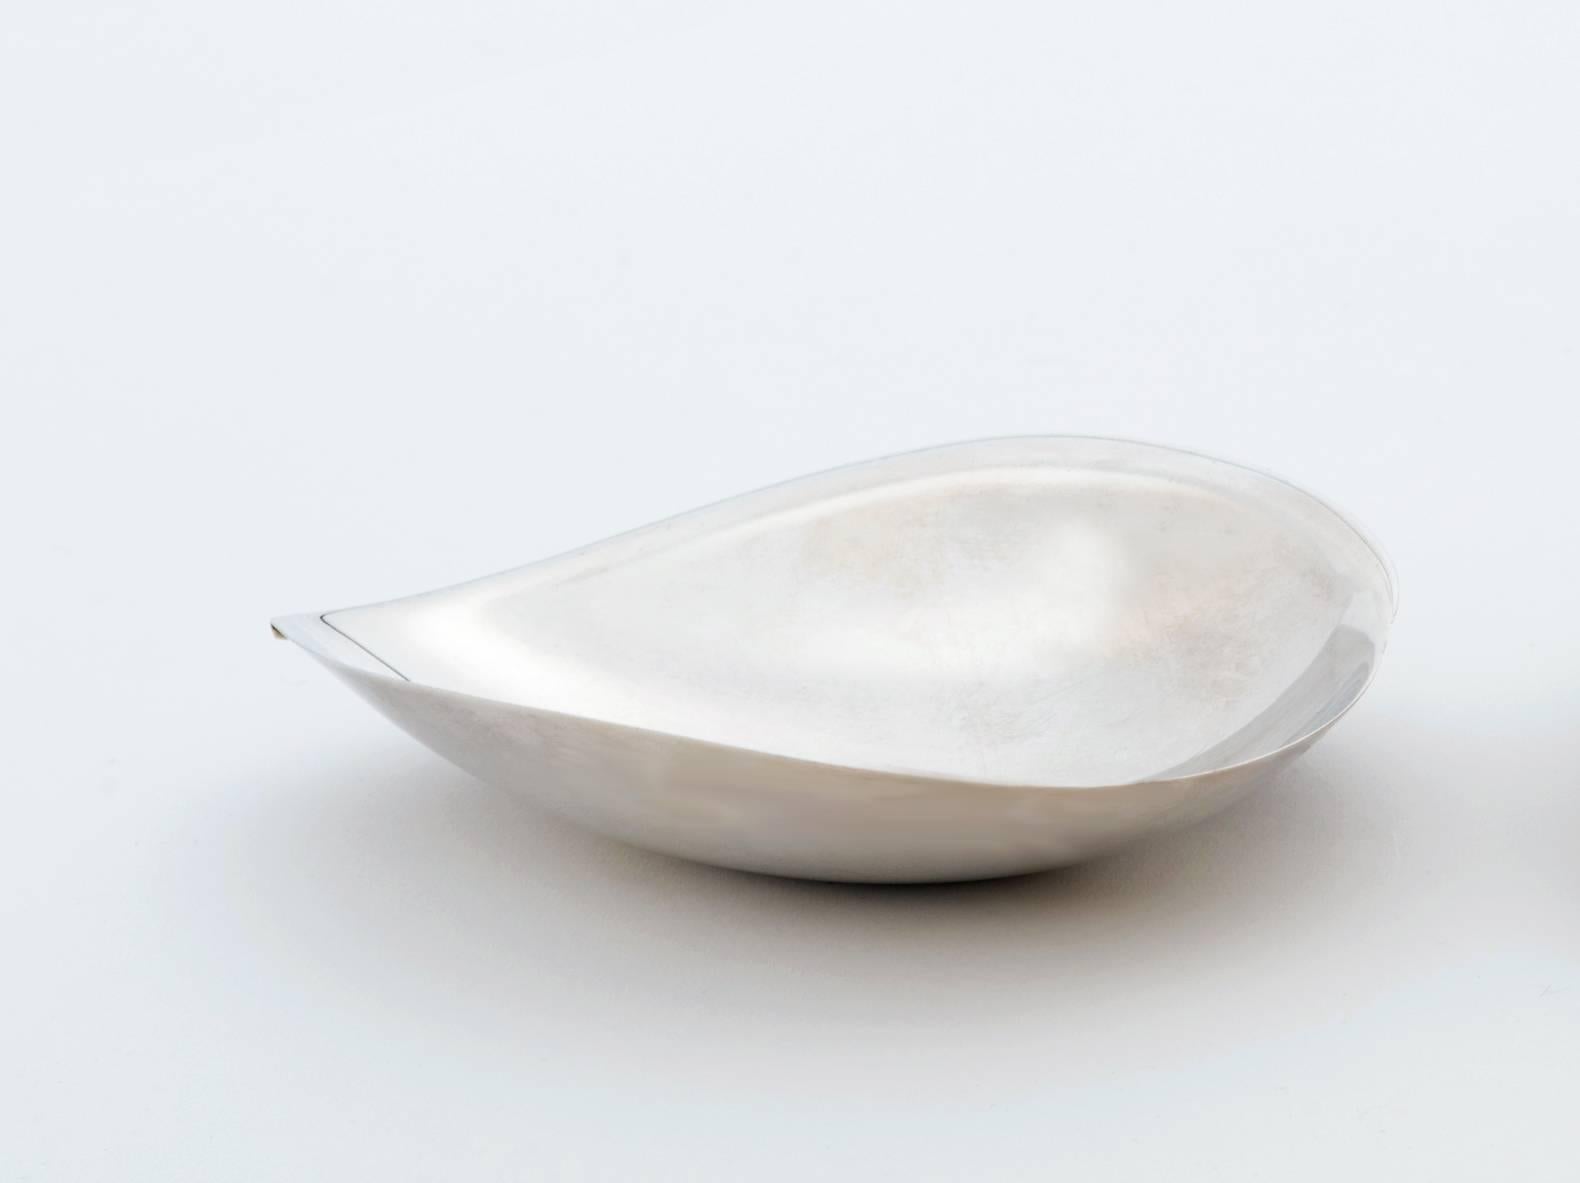 Tapio Wirkkala Pair of 'Leaf' Dishes in Silver for Kultakeskus Oy, 1959 - 1960 In Good Condition For Sale In Brooklyn, NY